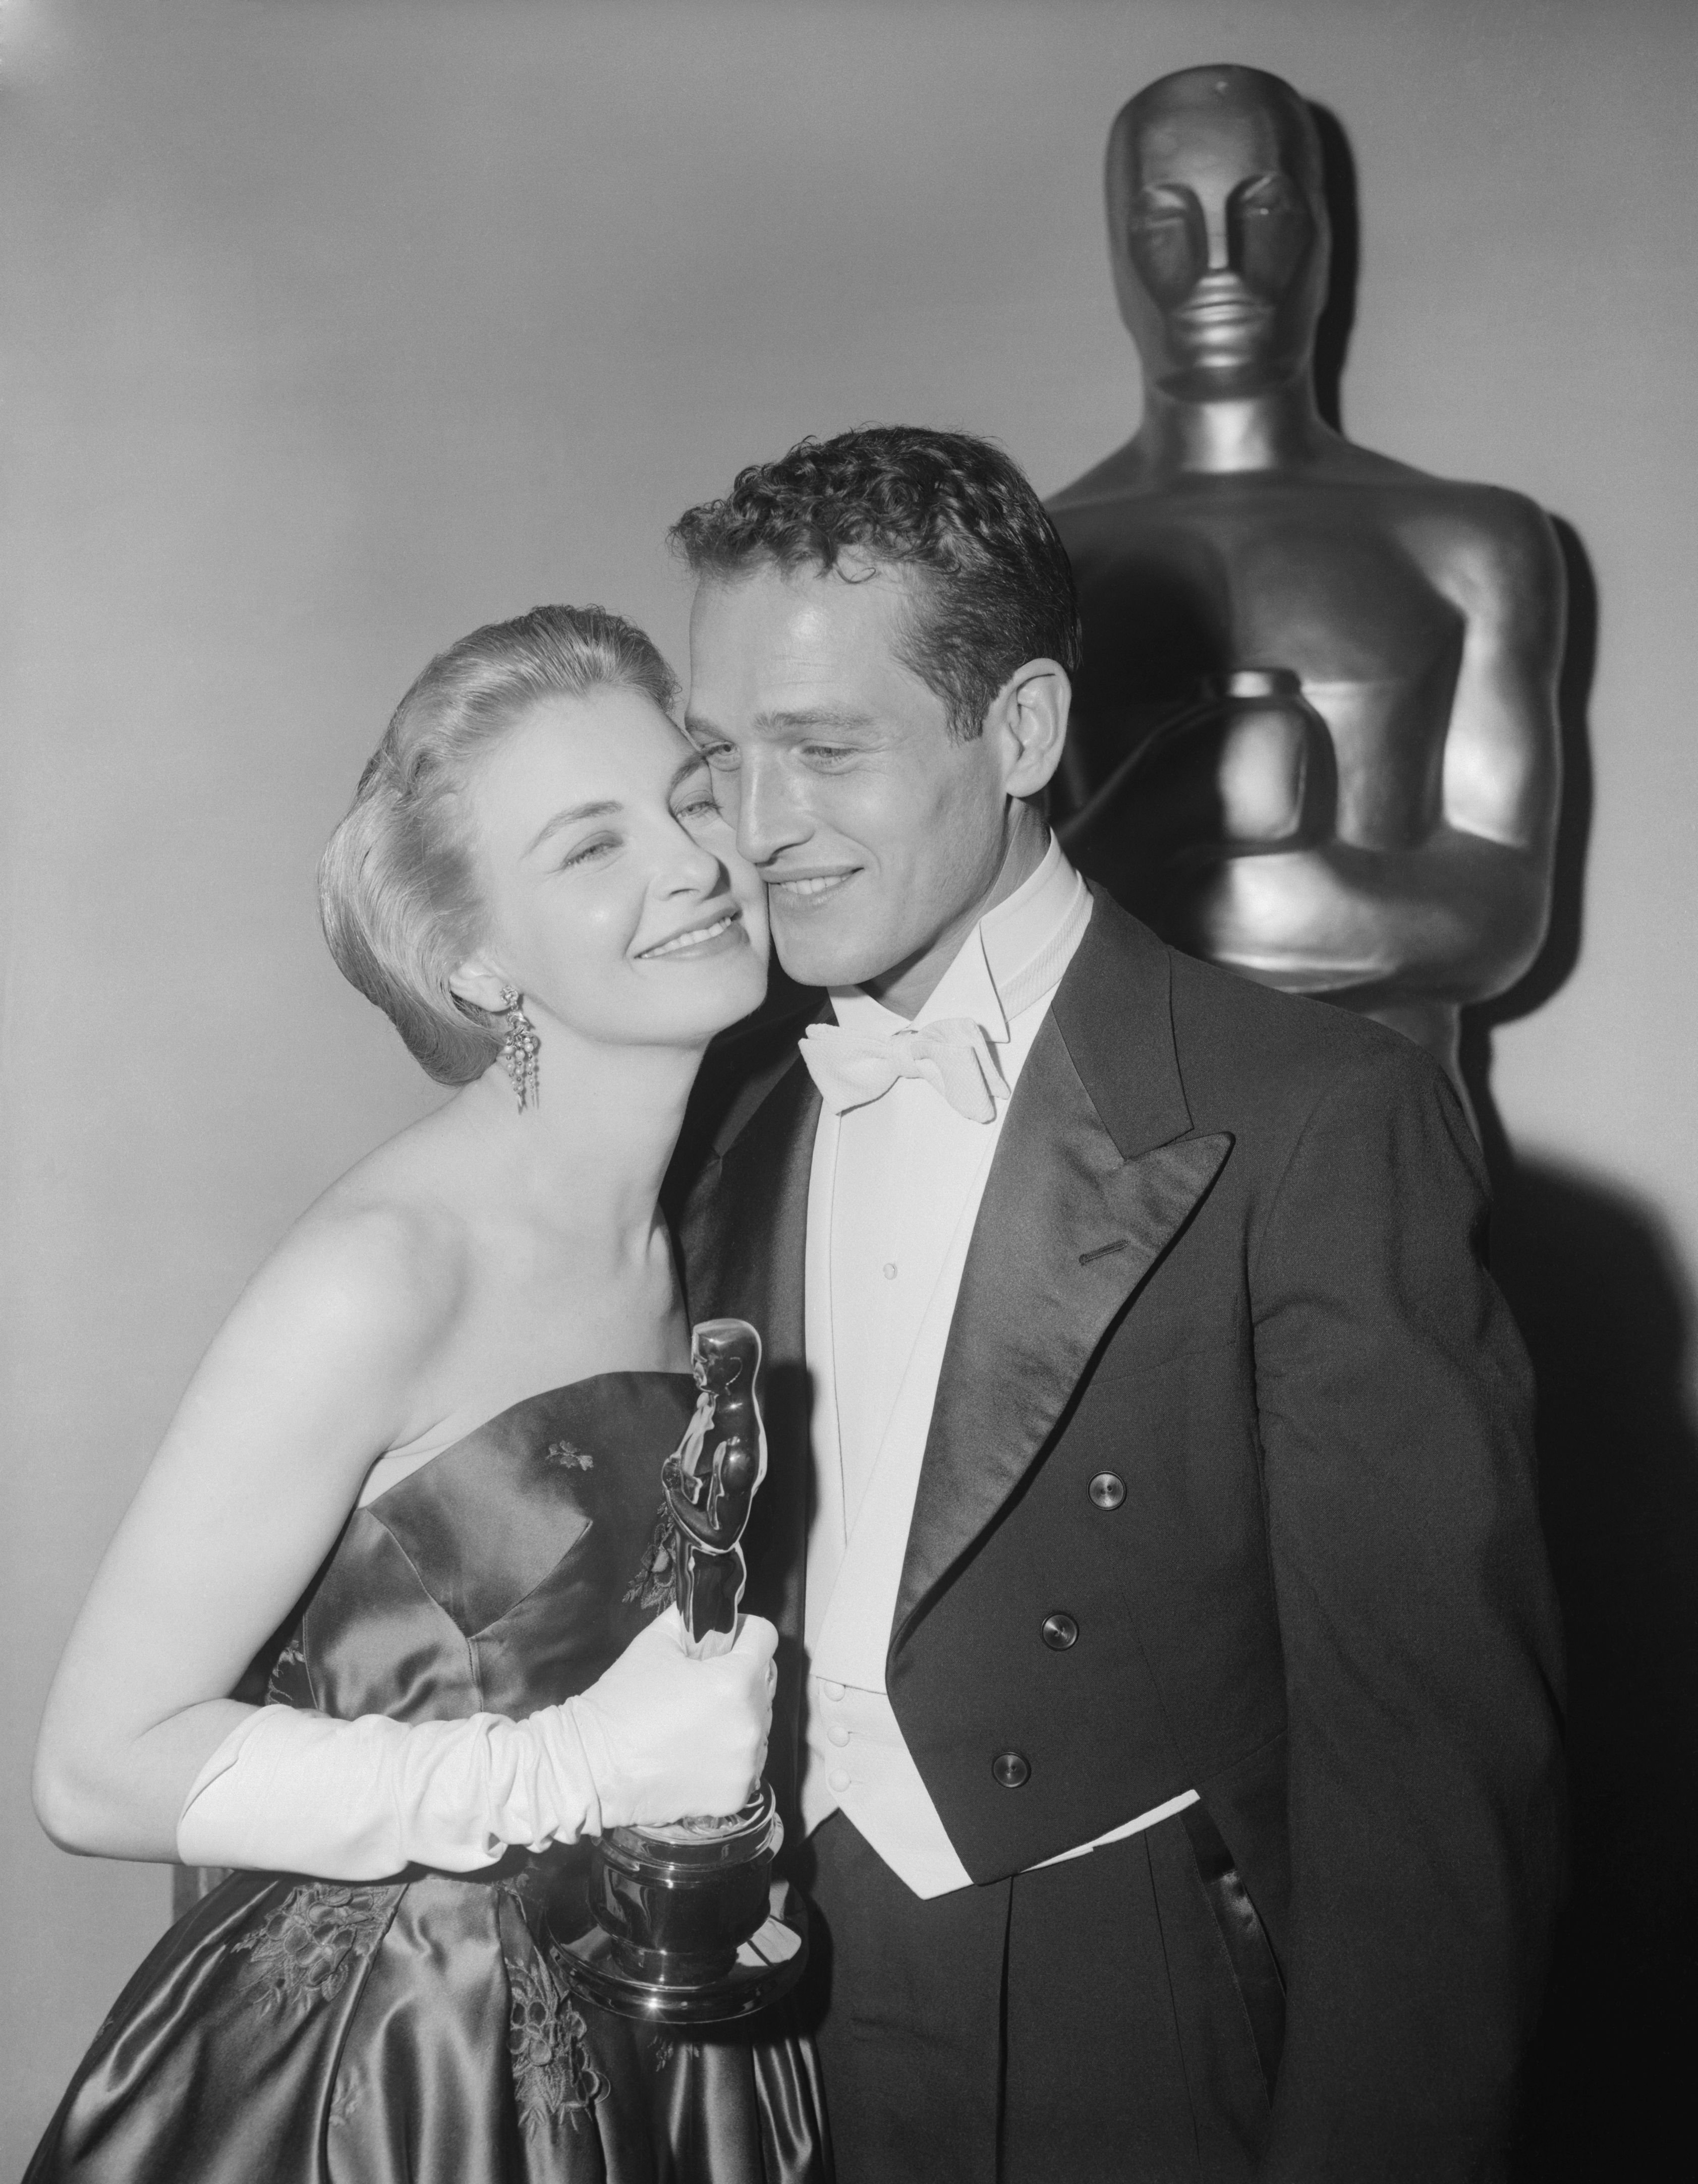 Joanne Woodward with Paul Newman during the 30th Annual Academy Awards. | Source: Getty Images